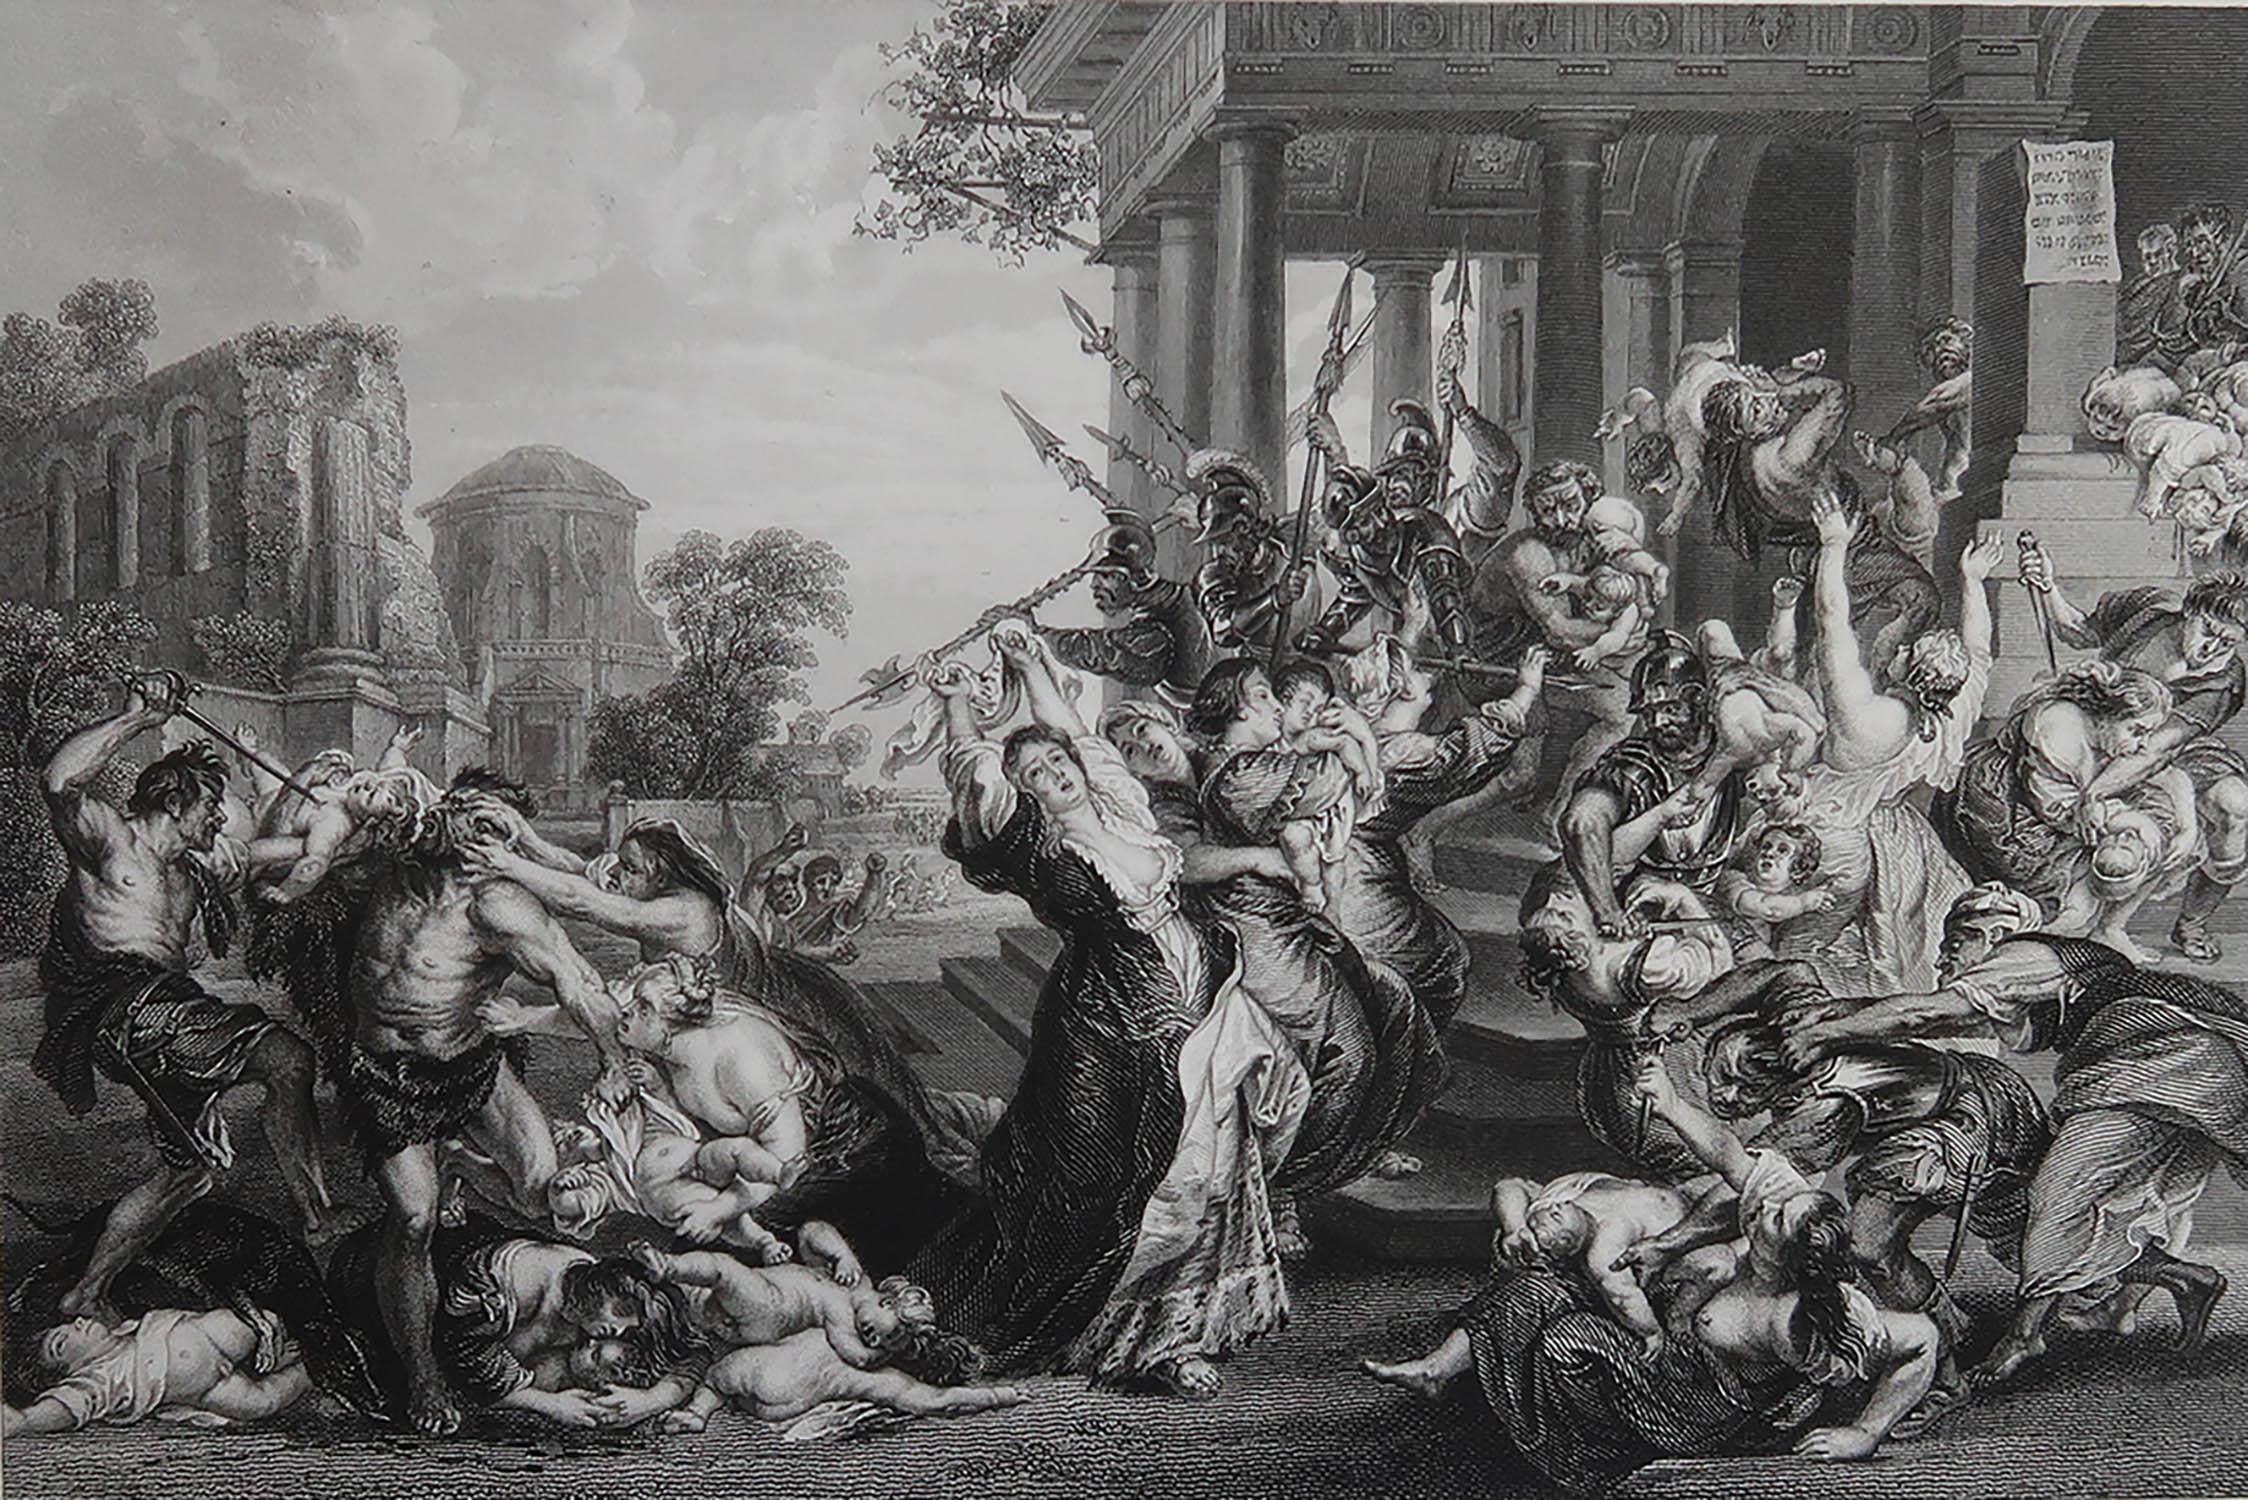 Wonderful image of The Massacre of The Innocents

Fine steel engraving

Published by Fisher. C.1840

Unframed.

